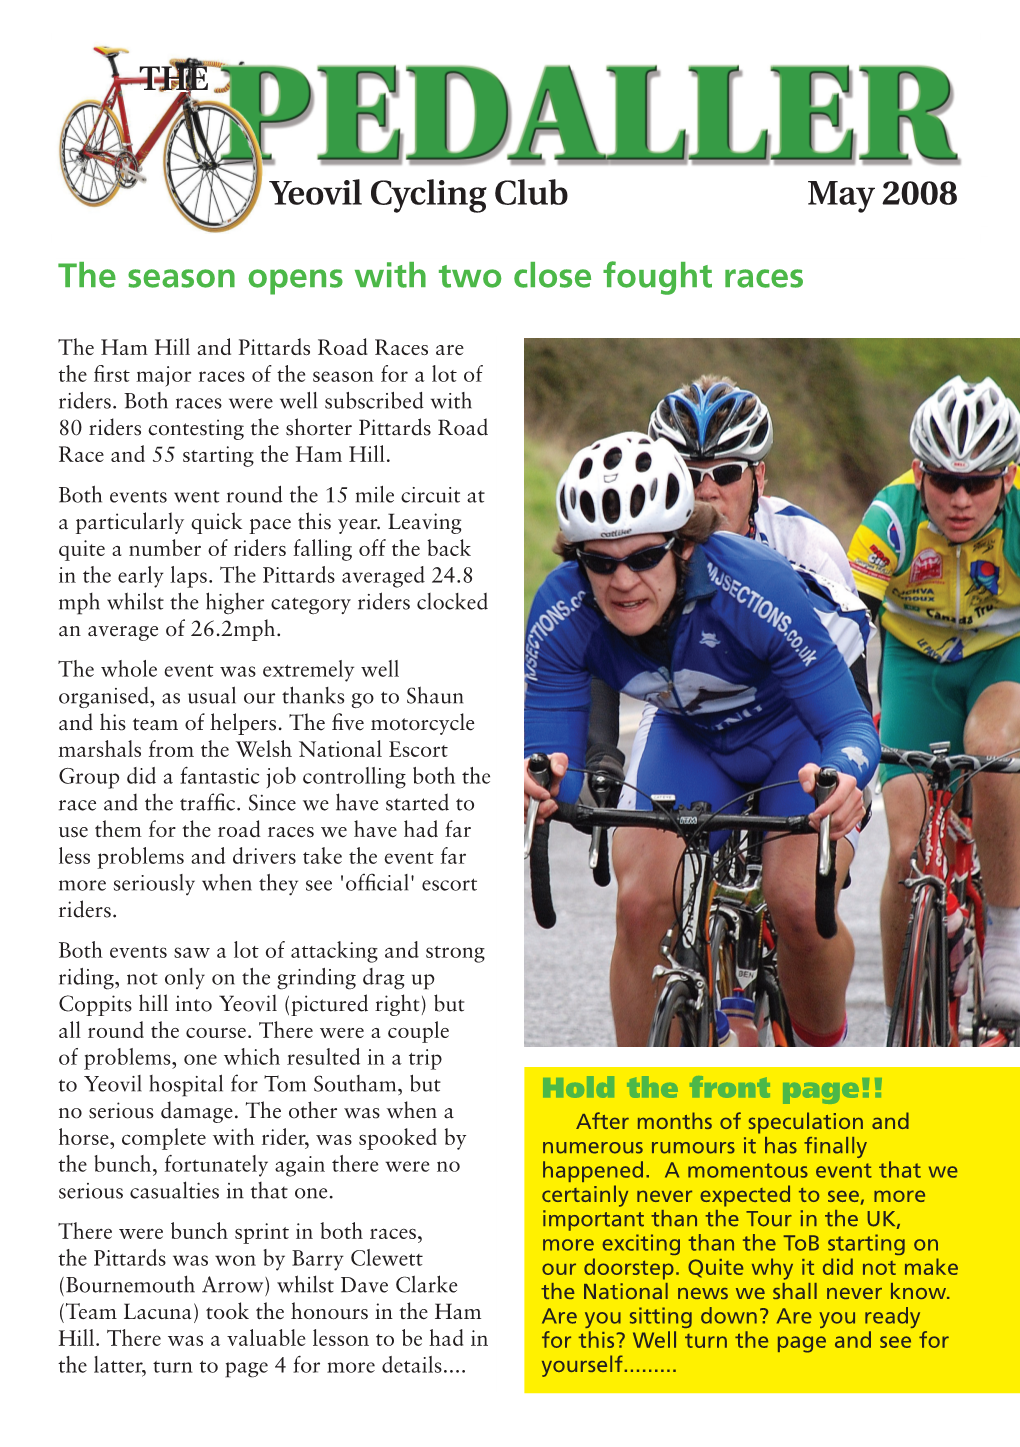 The Season Opens with Two Close Fought Races the Yeovil Cycling Club May 2008